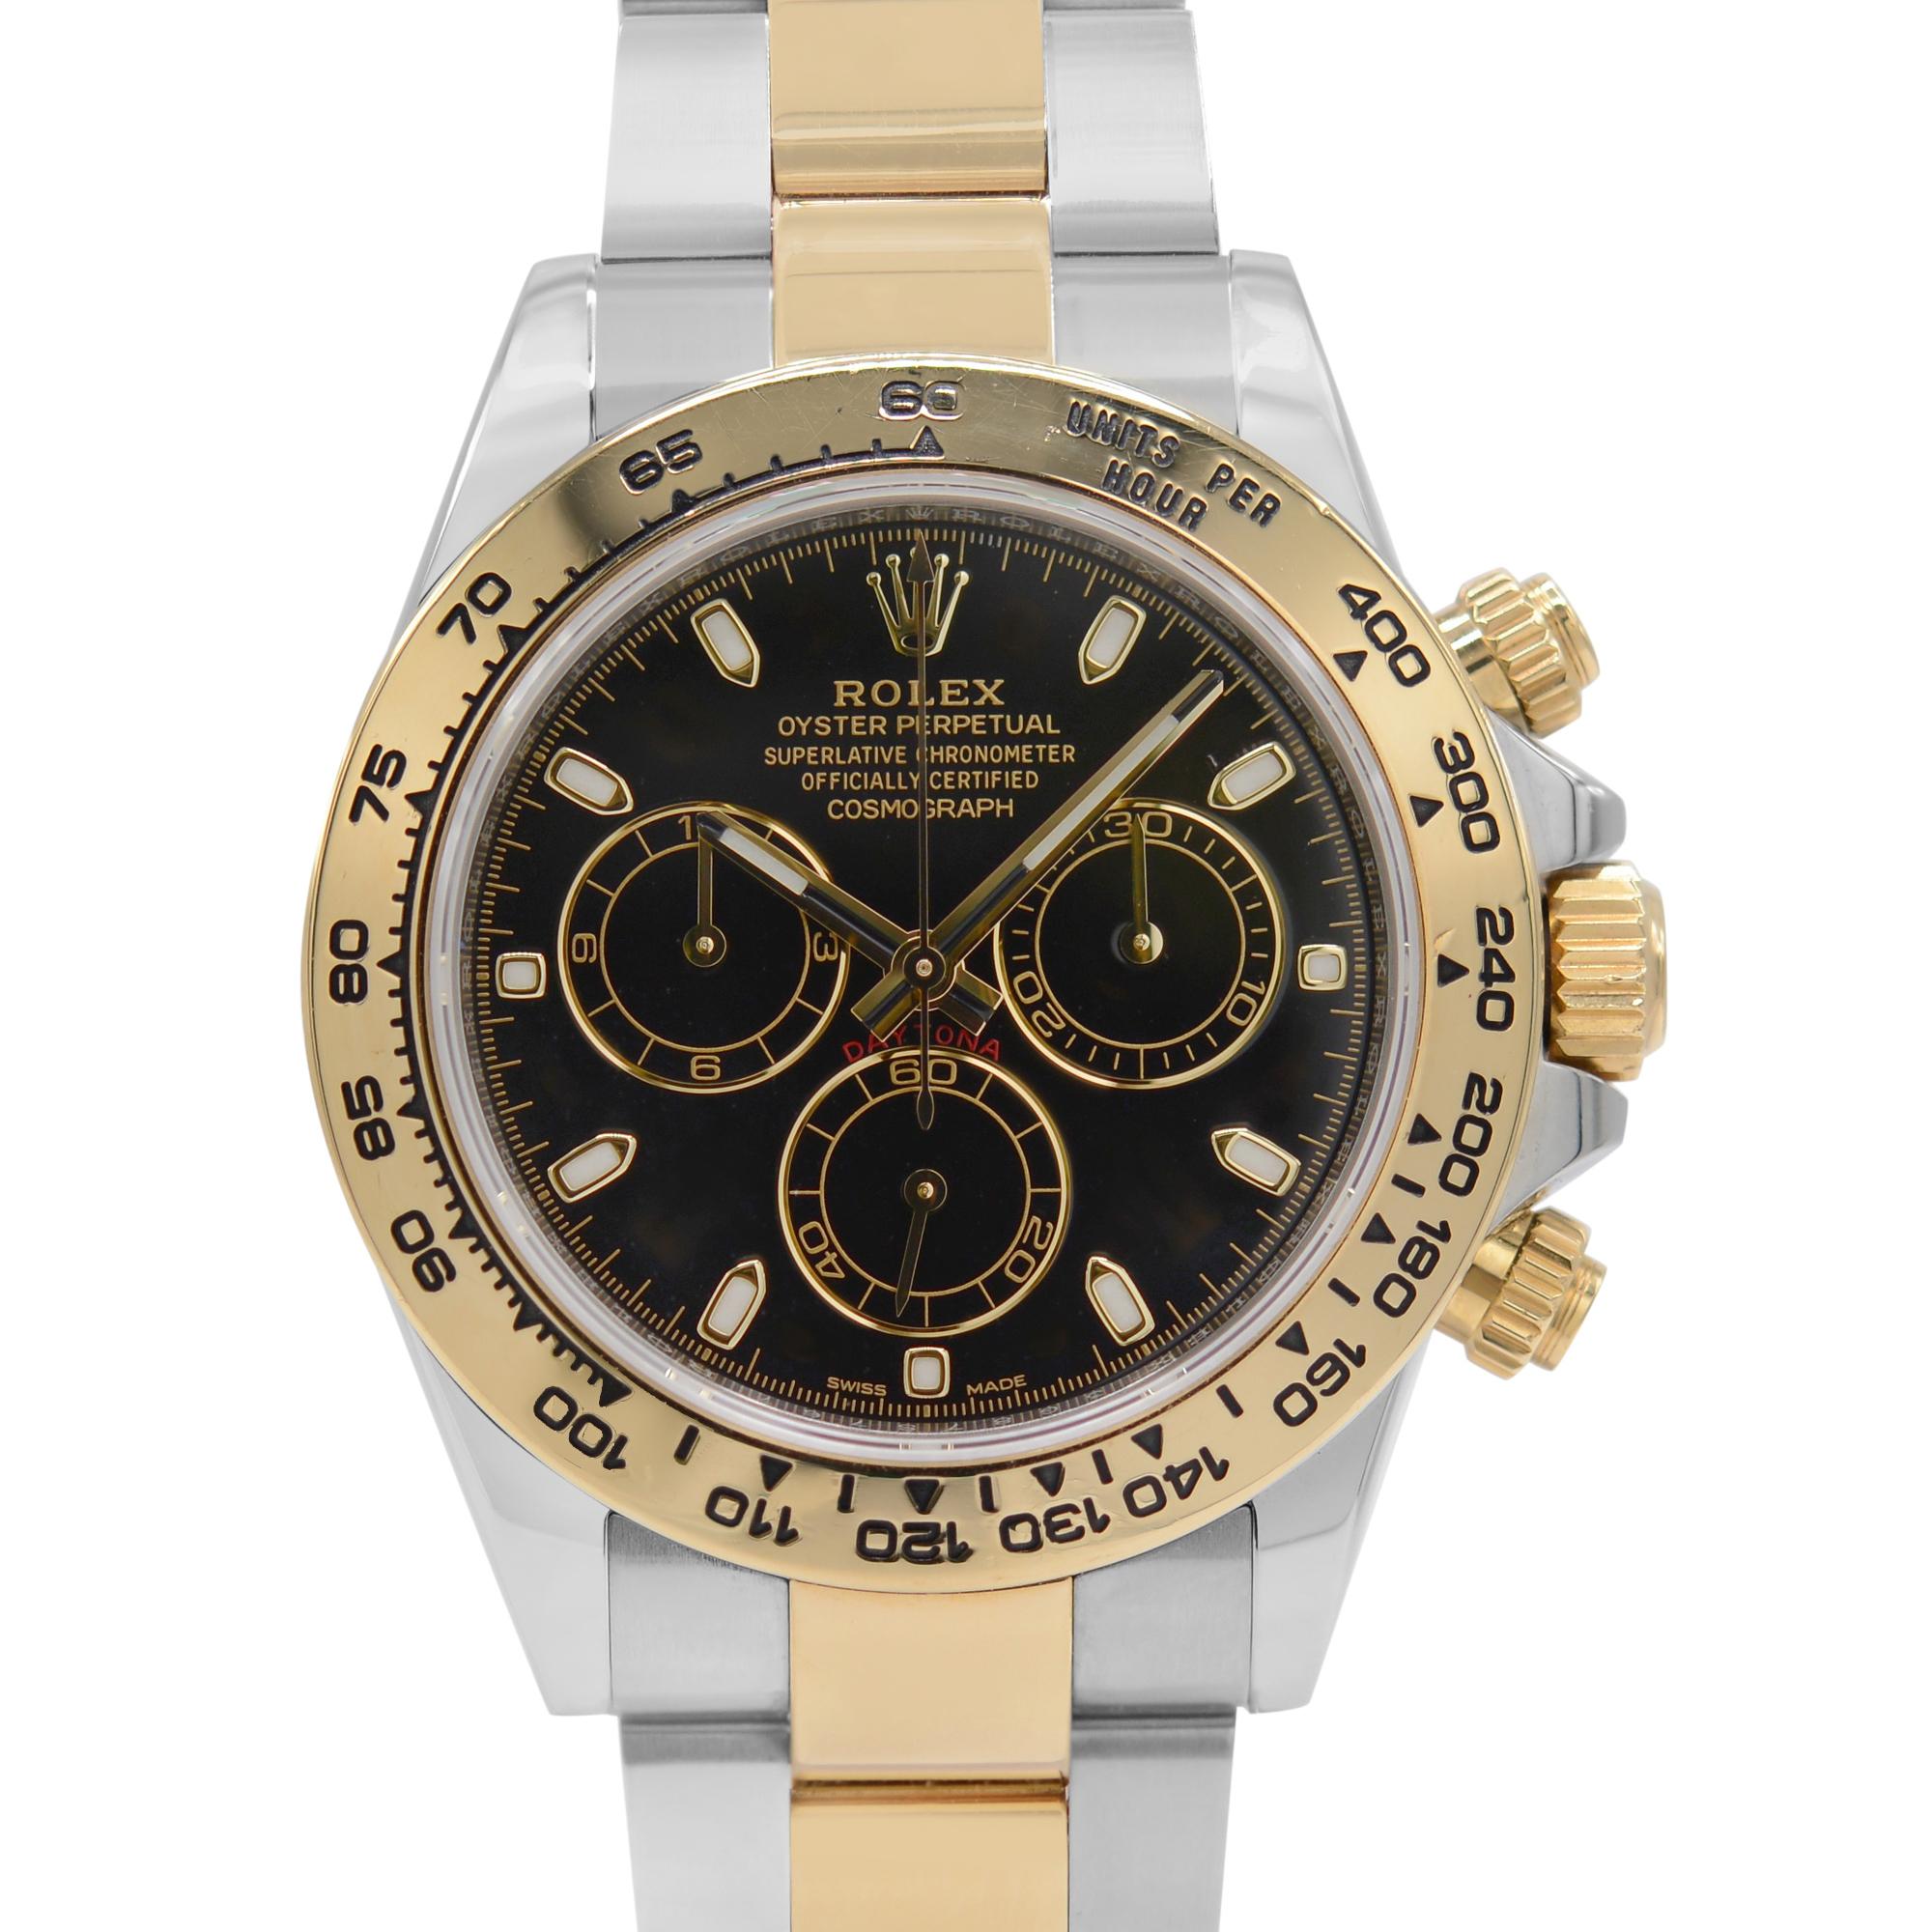 Pre-Owned Rolex Daytona Steel 18K Yellow Gold Black Dial Mens Automatic Watch 116503. The Watch is powered by an Automatic Movement and Features: Polished Steel Round Case. Stainless Steel and 18k Yellow Gold Rolex Oyster Bracelet. Fixed 18k Yellow